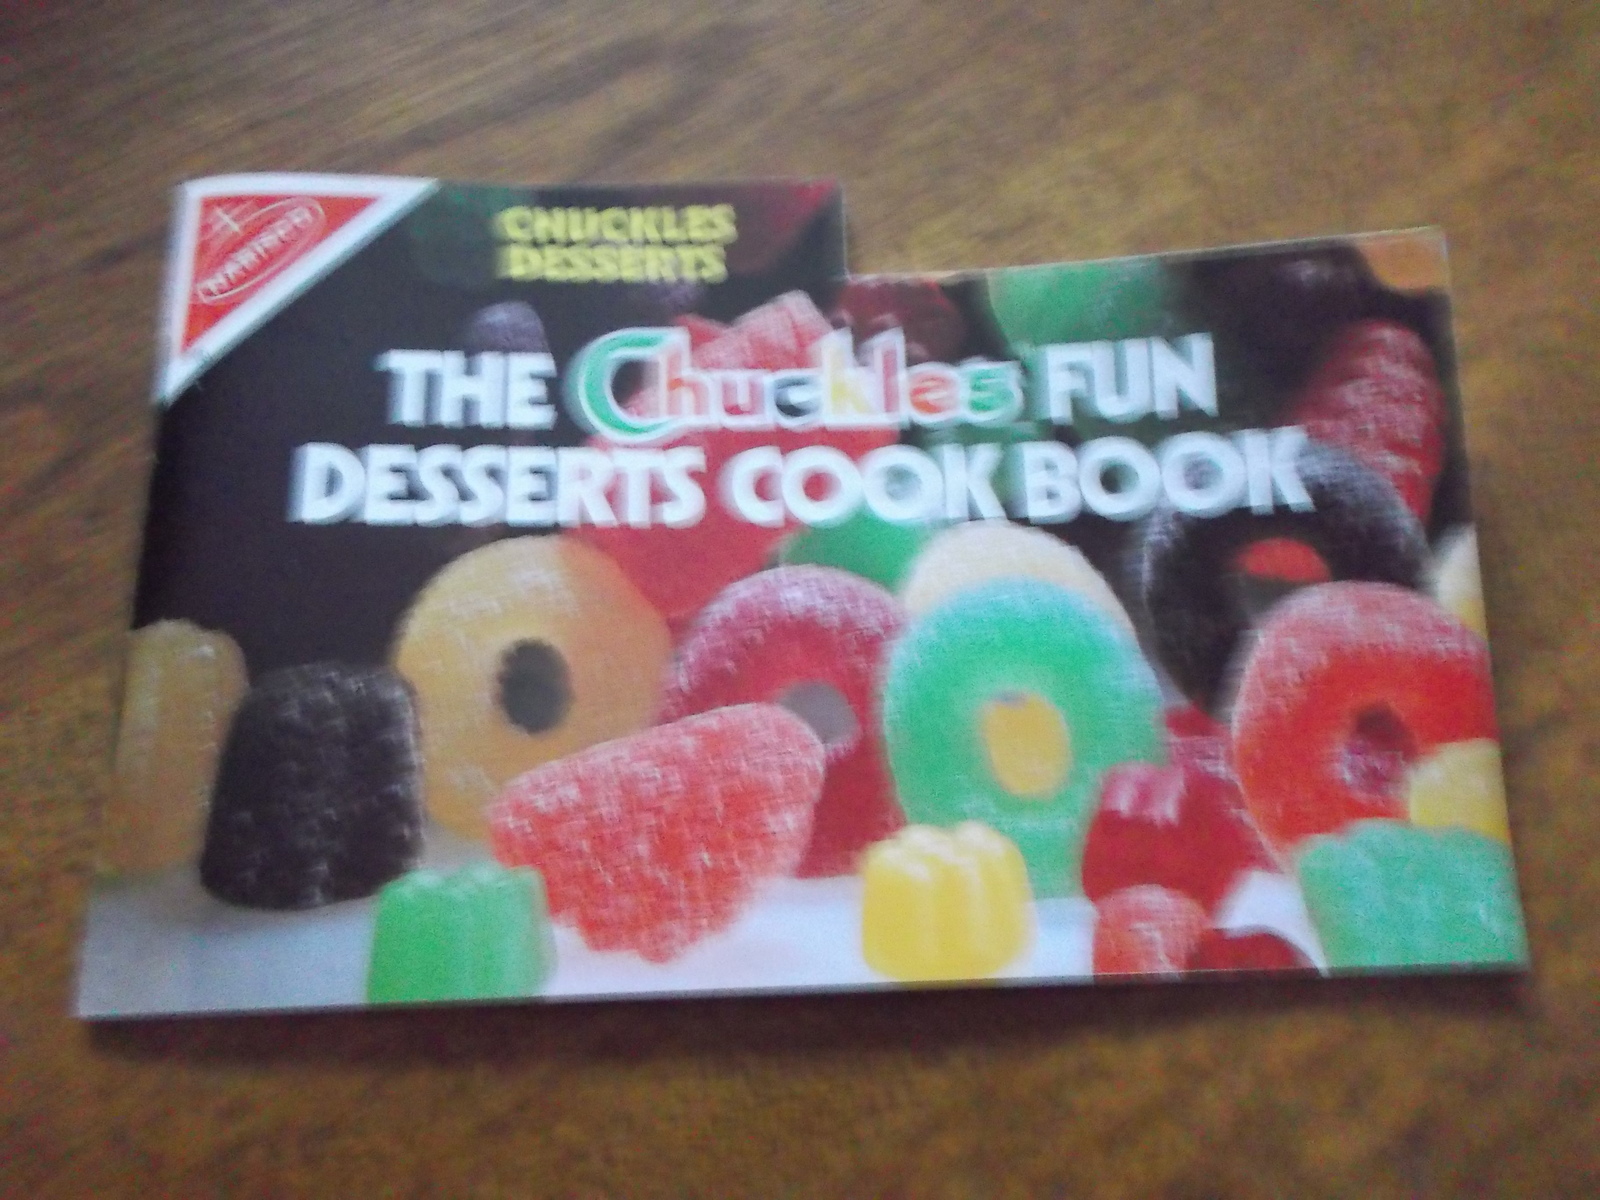 Chuckles Desserts "Chuckles Fun Desserts Cook Book" from Nabisco Confections - $3.00